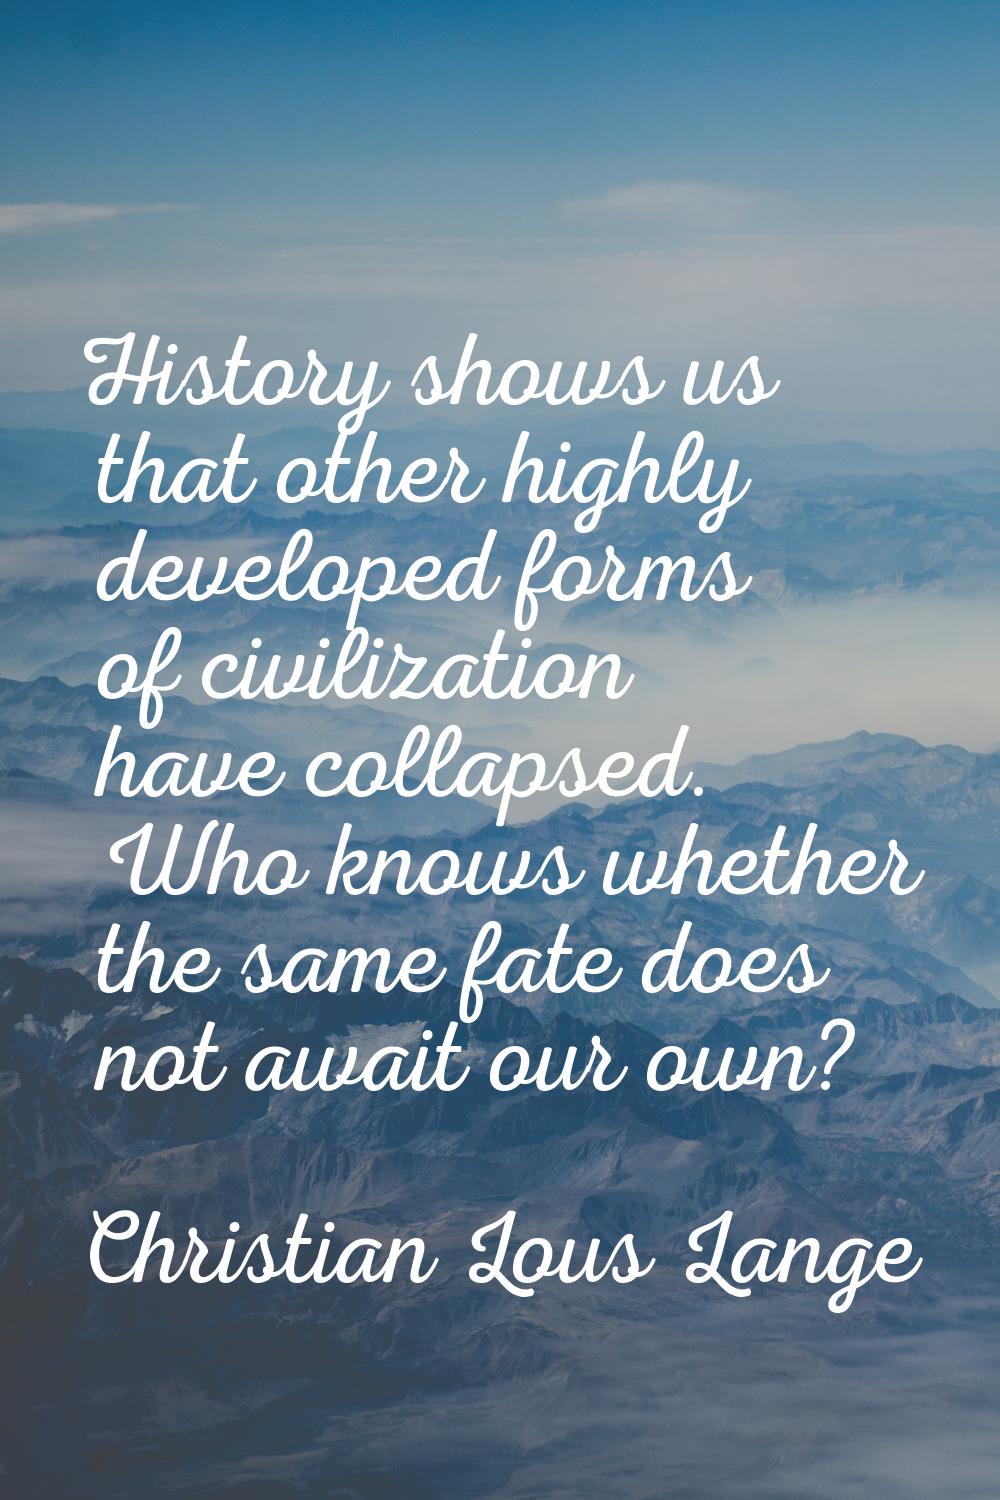 History shows us that other highly developed forms of civilization have collapsed. Who knows whethe